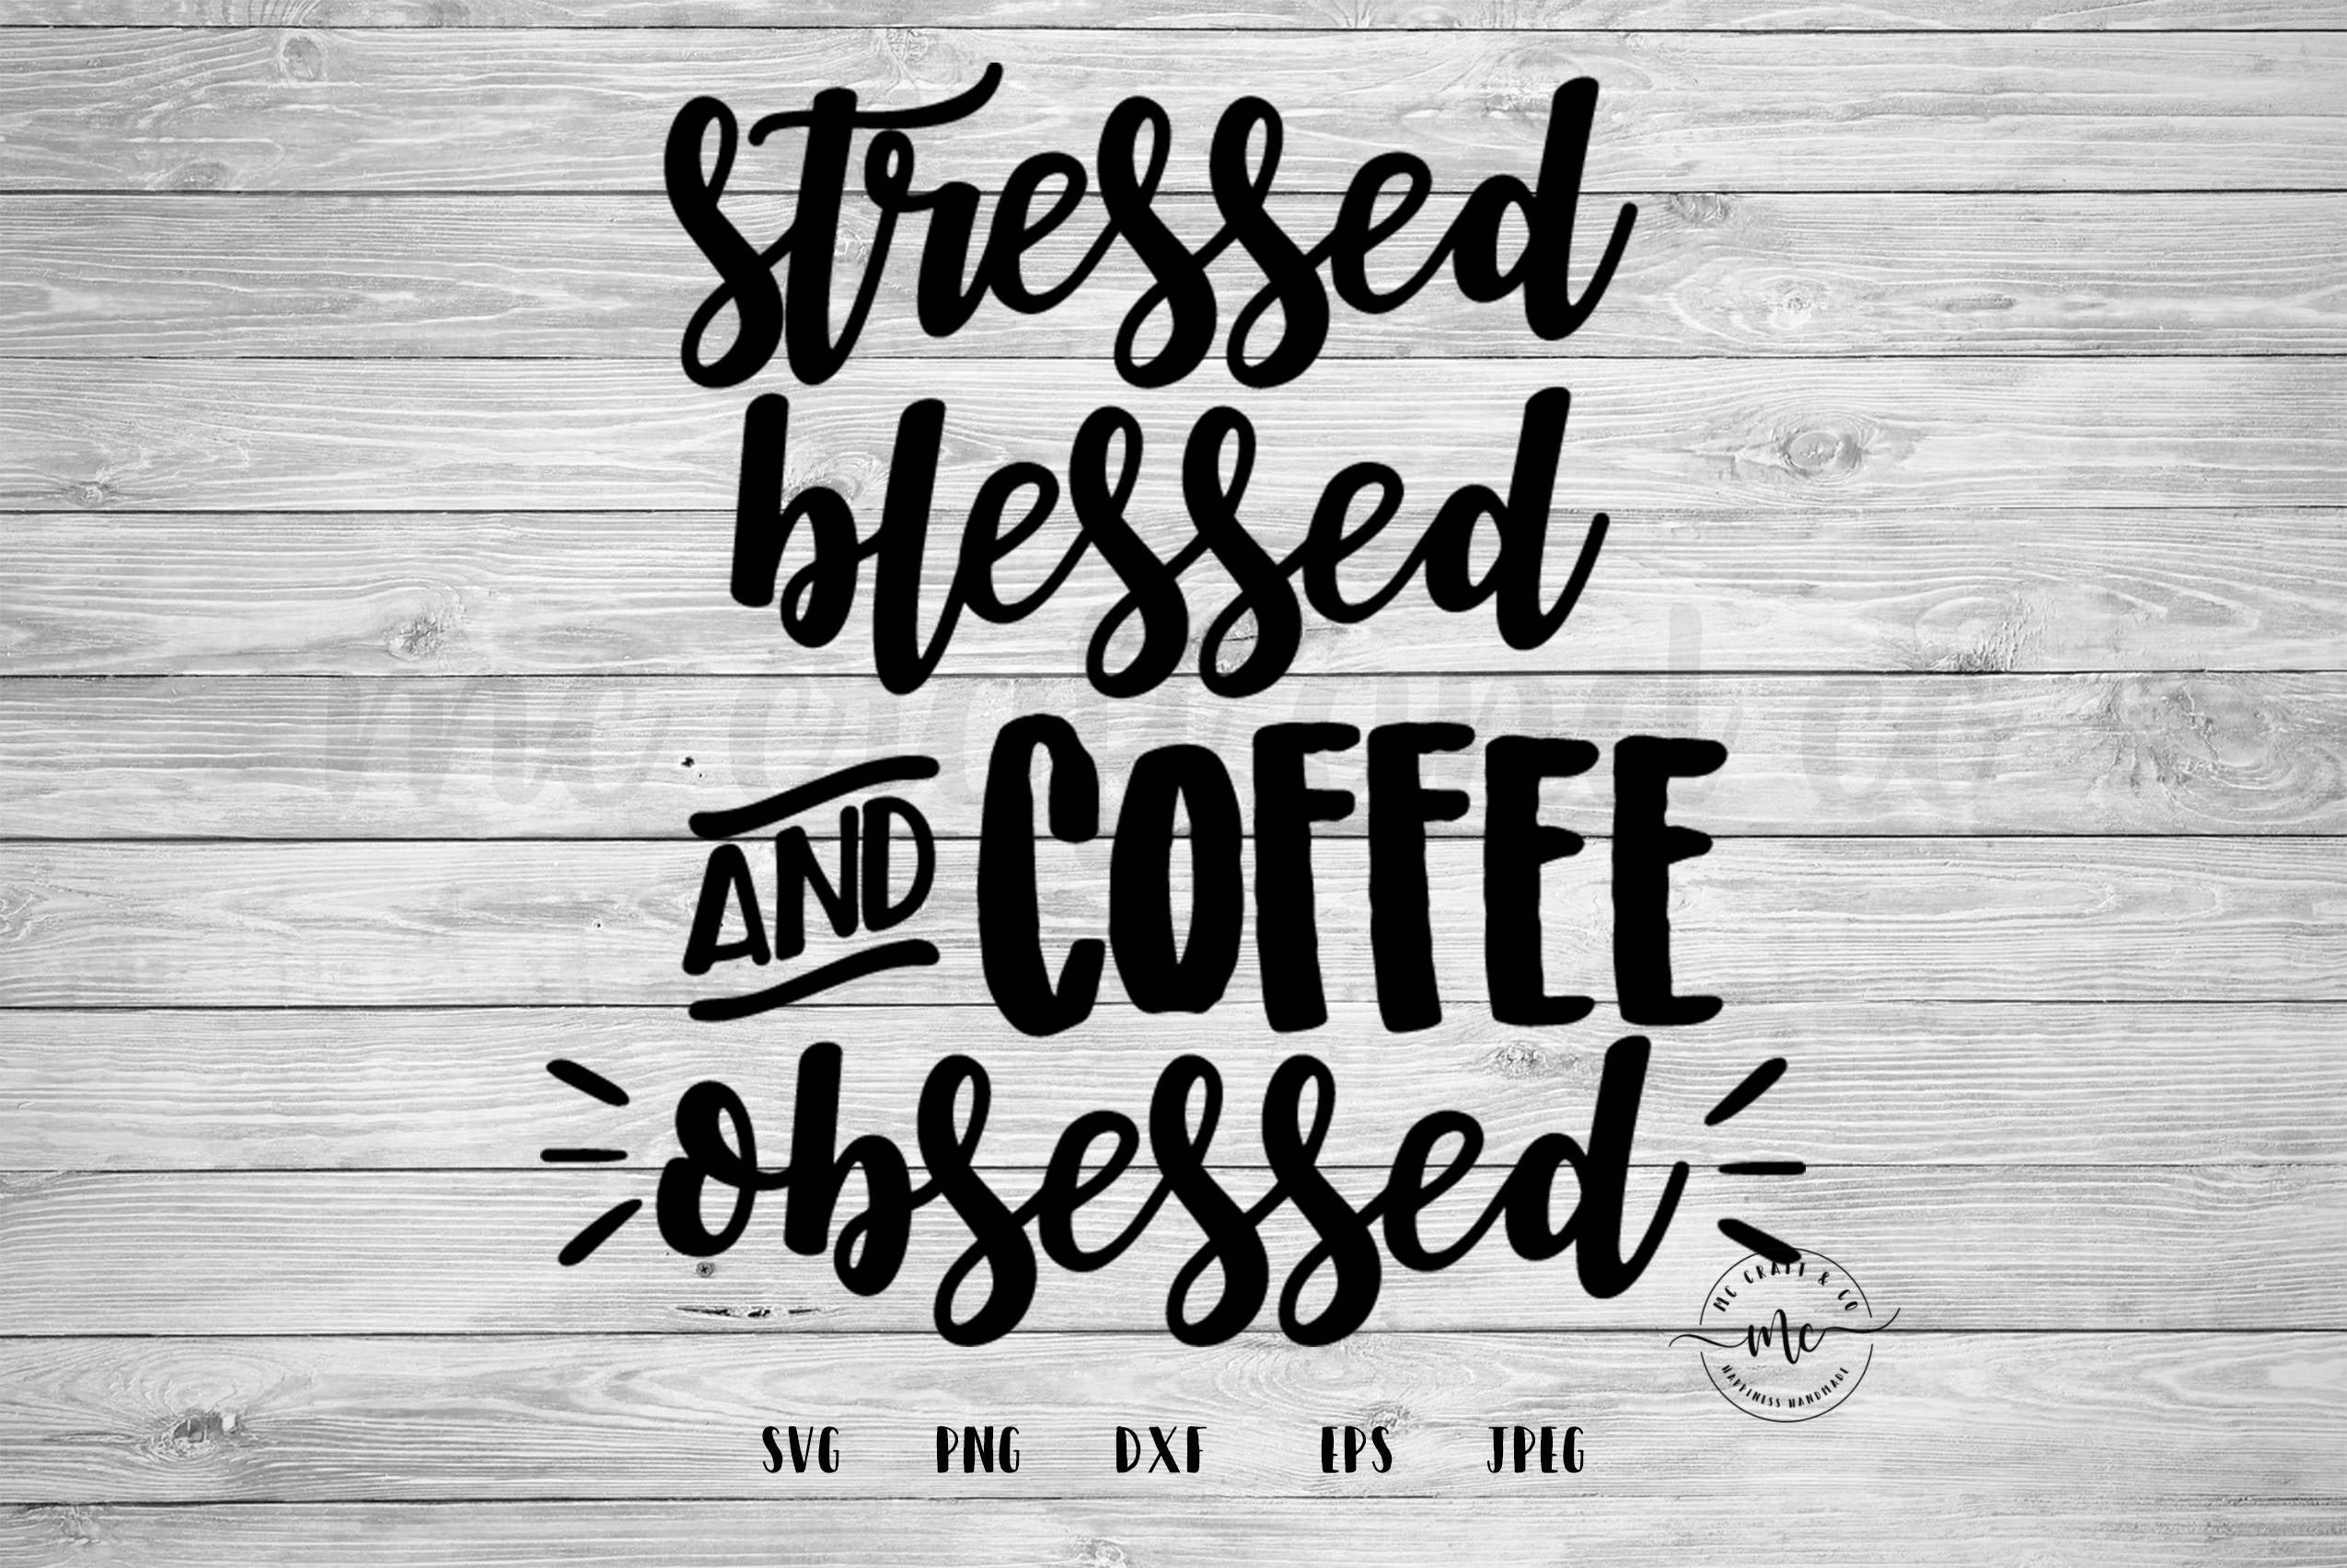 Funny Coffee Quotes And Sayings
 Stressed Blessed and Coffee Obsessed Coffee Quotes Funny